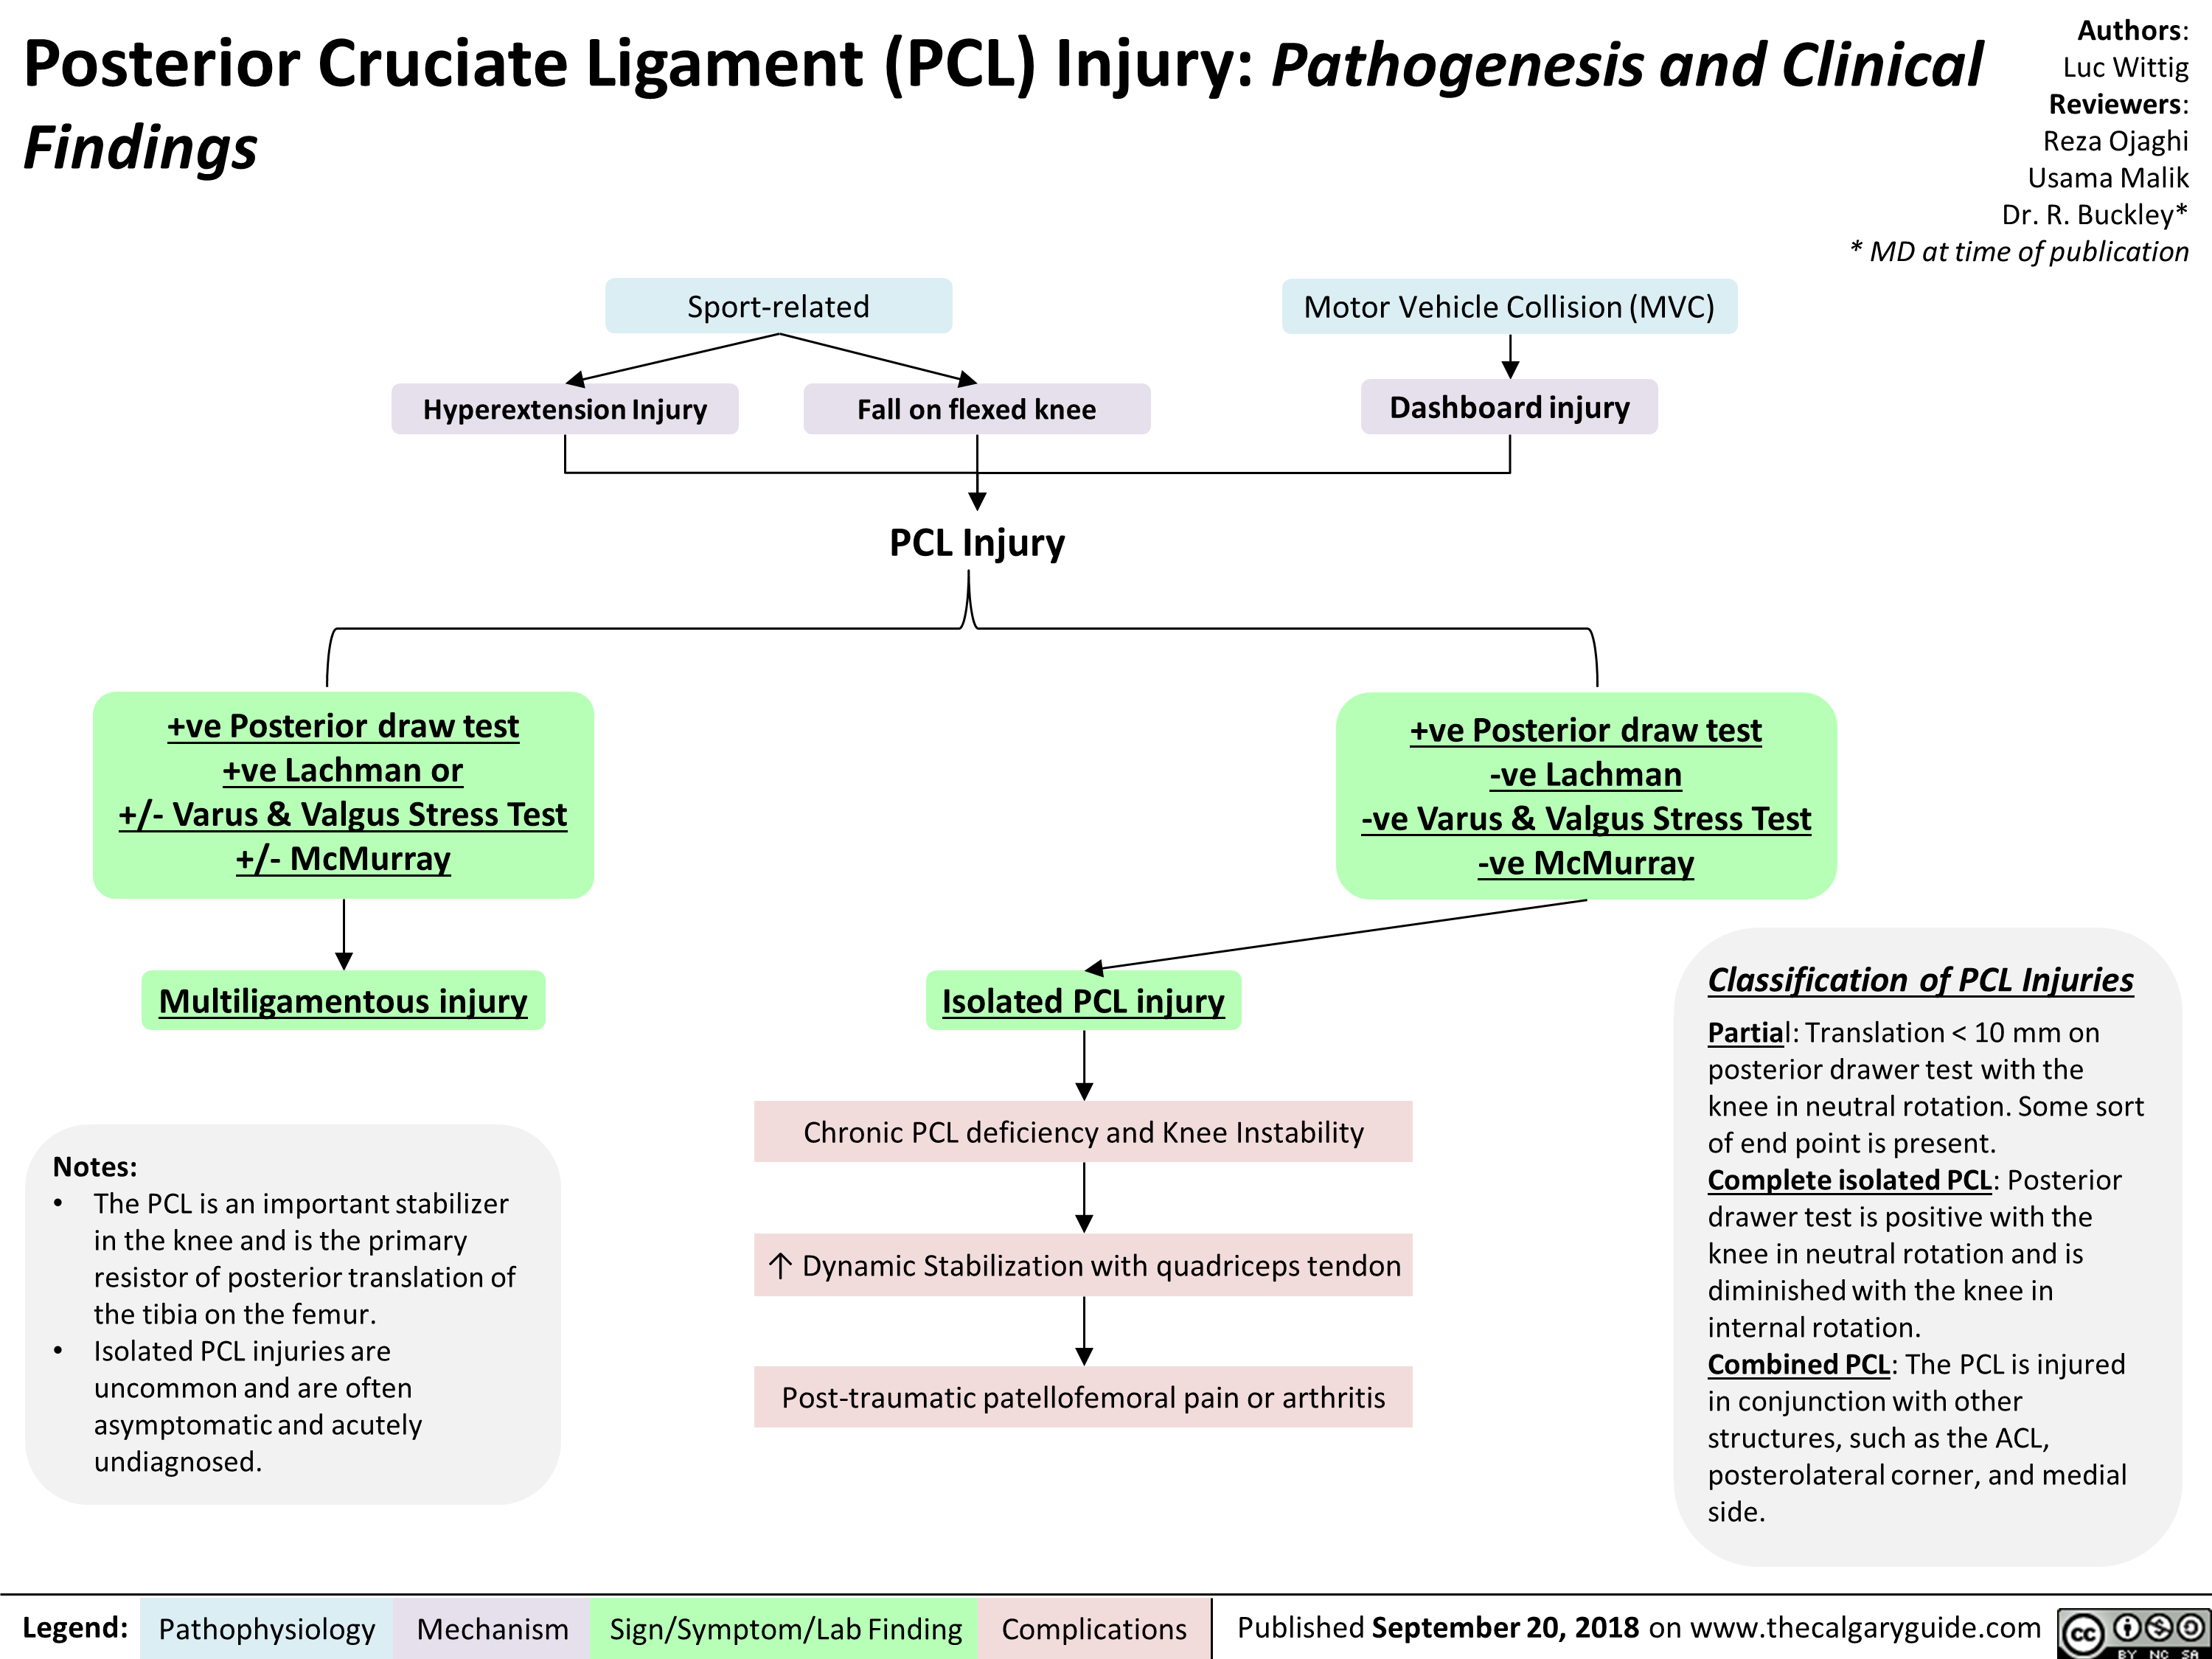 Posterior Cruciate Ligament (PCL) Injury: Pathogenesis and Clinical Findings 
Sport-related 
Hyperextension Injury 
Motor Vehicle Collision (MVC) 
Fall on flexed knee Dashboard injury 
PCL Injury 
+ve Posterior draw test  +ve Lachman or  +/- Varus & Valgus Stress Test +/- McMurray  
1 
Multiligamentous injury 
Notes: • The PCL is an important stabilizer in the knee and is the primary resistor of posterior translation of the tibia on the femur. • Isolated PCL injuries are uncommon and are often asymptomatic and acutely undiagnosed. 
Legend: Pathophysiology Mechanism 
Isolated PCL injury 
+ve Posterior draw test  -ye Lachman  -ye Varus & Valgus Stress Test -ye McMurray 
Chronic PCL deficiency and Knee Instability 
1 
1` Dynamic Stabilization with quadriceps tendon 
1 
Post-traumatic patellofemoral pain or arthritis 
Sign/Symptom/Lab Finding 
Authors: Luc Wittig Reviewers: Reza Ojaghi Usama Malik Dr. R. Buckley* * MD at time of publication 
Classification of PCL Injuries  Partial: Translation < 10 mm on posterior drawer test with the knee in neutral rotation. Some sort of end point is present. Complete isolated PCL: Posterior drawer test is positive with the knee in neutral rotation and is diminished with the knee in internal rotation. Combined PCL: The PCL is injured in conjunction with other structures, such as the ACL, posterolateral corner, and medial side. 